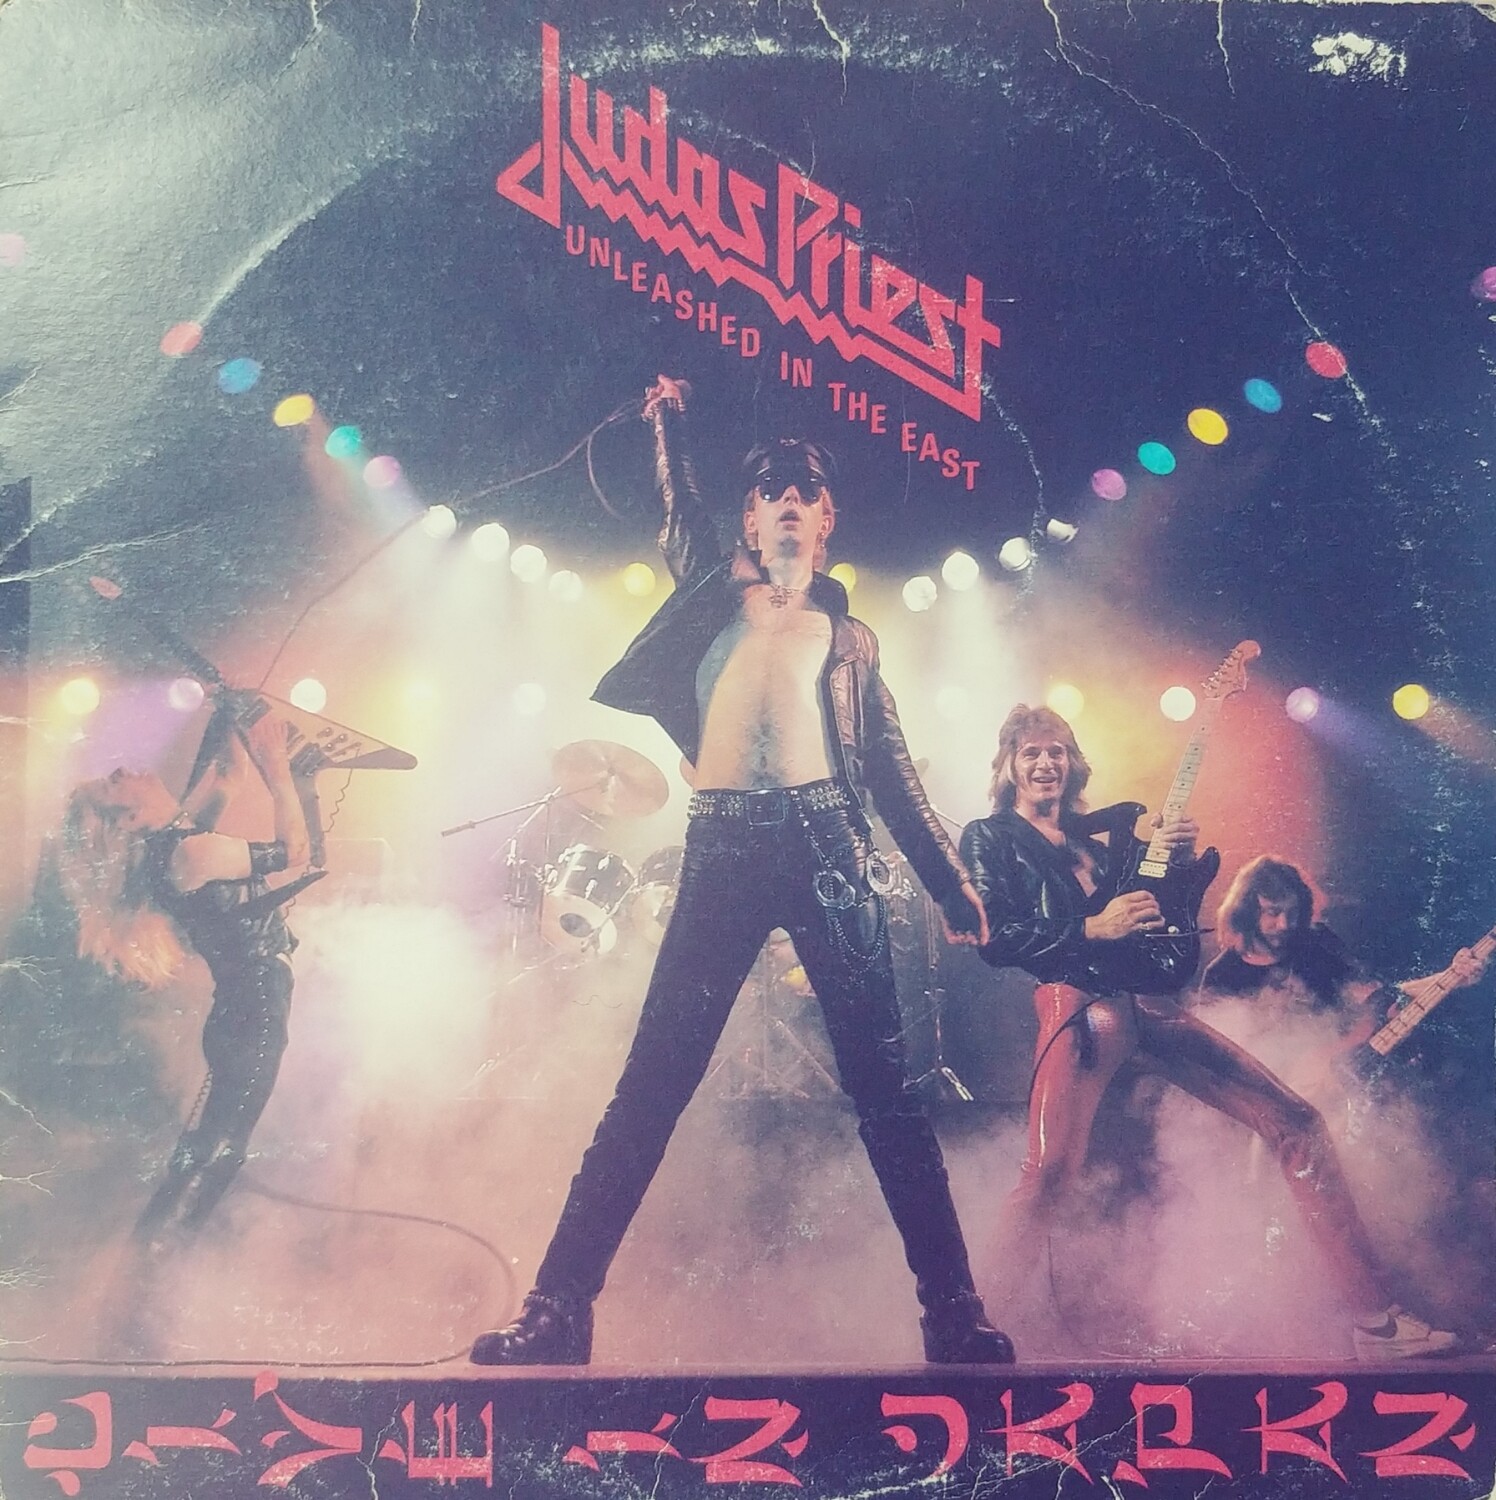 Judas Priest - Unleashed in the east